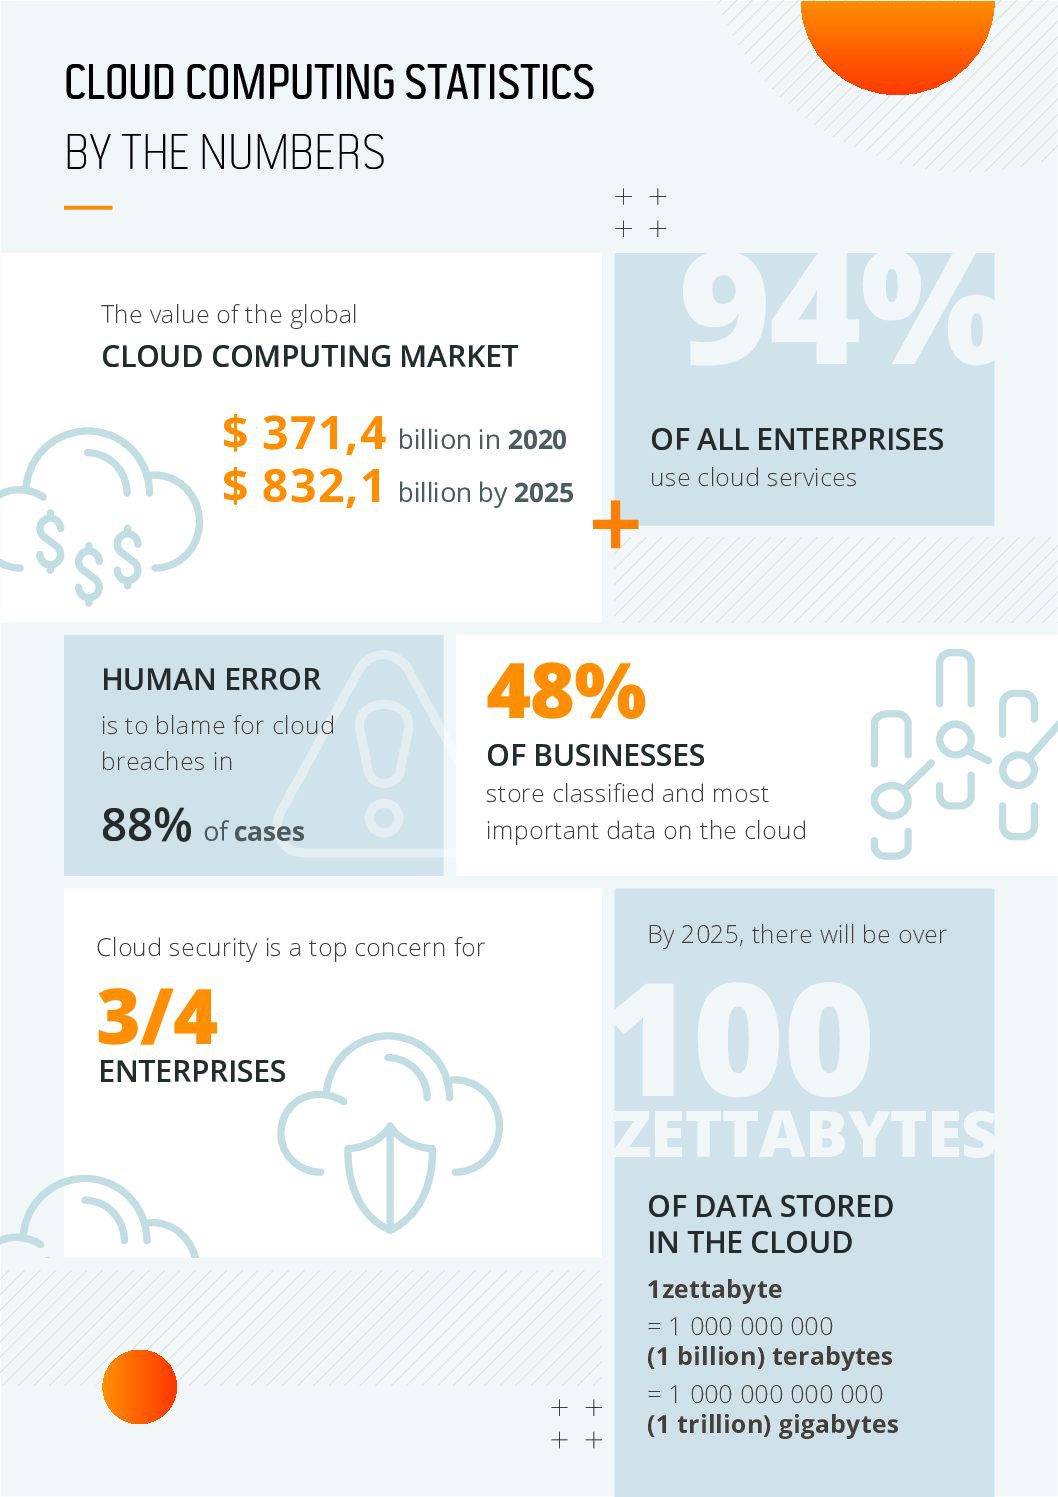 Cloud Computing Statistics by the numbers